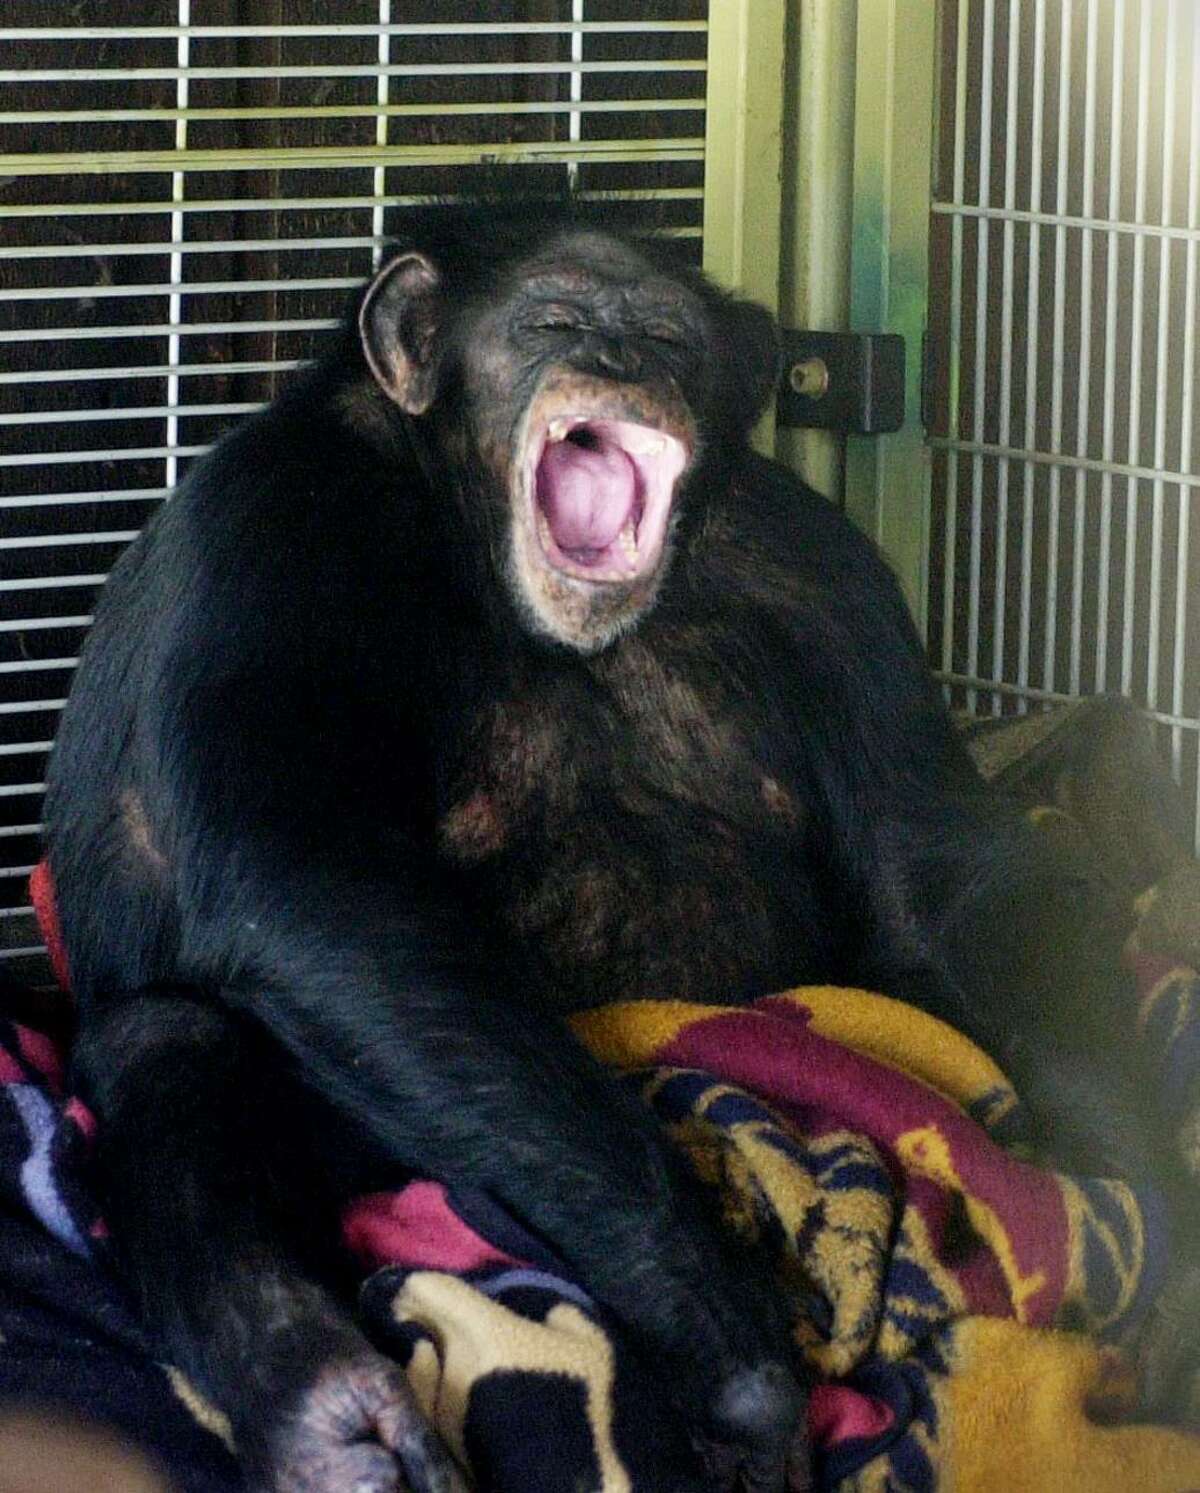 Travis, a 10 year old chimpanzee, sits in the corner of his playroom at the home of Sandy and Jerome Herold. On Feb. 16, 2009, he brutally attacked a friend of his owner’s, leading to police to fatally shoot him.